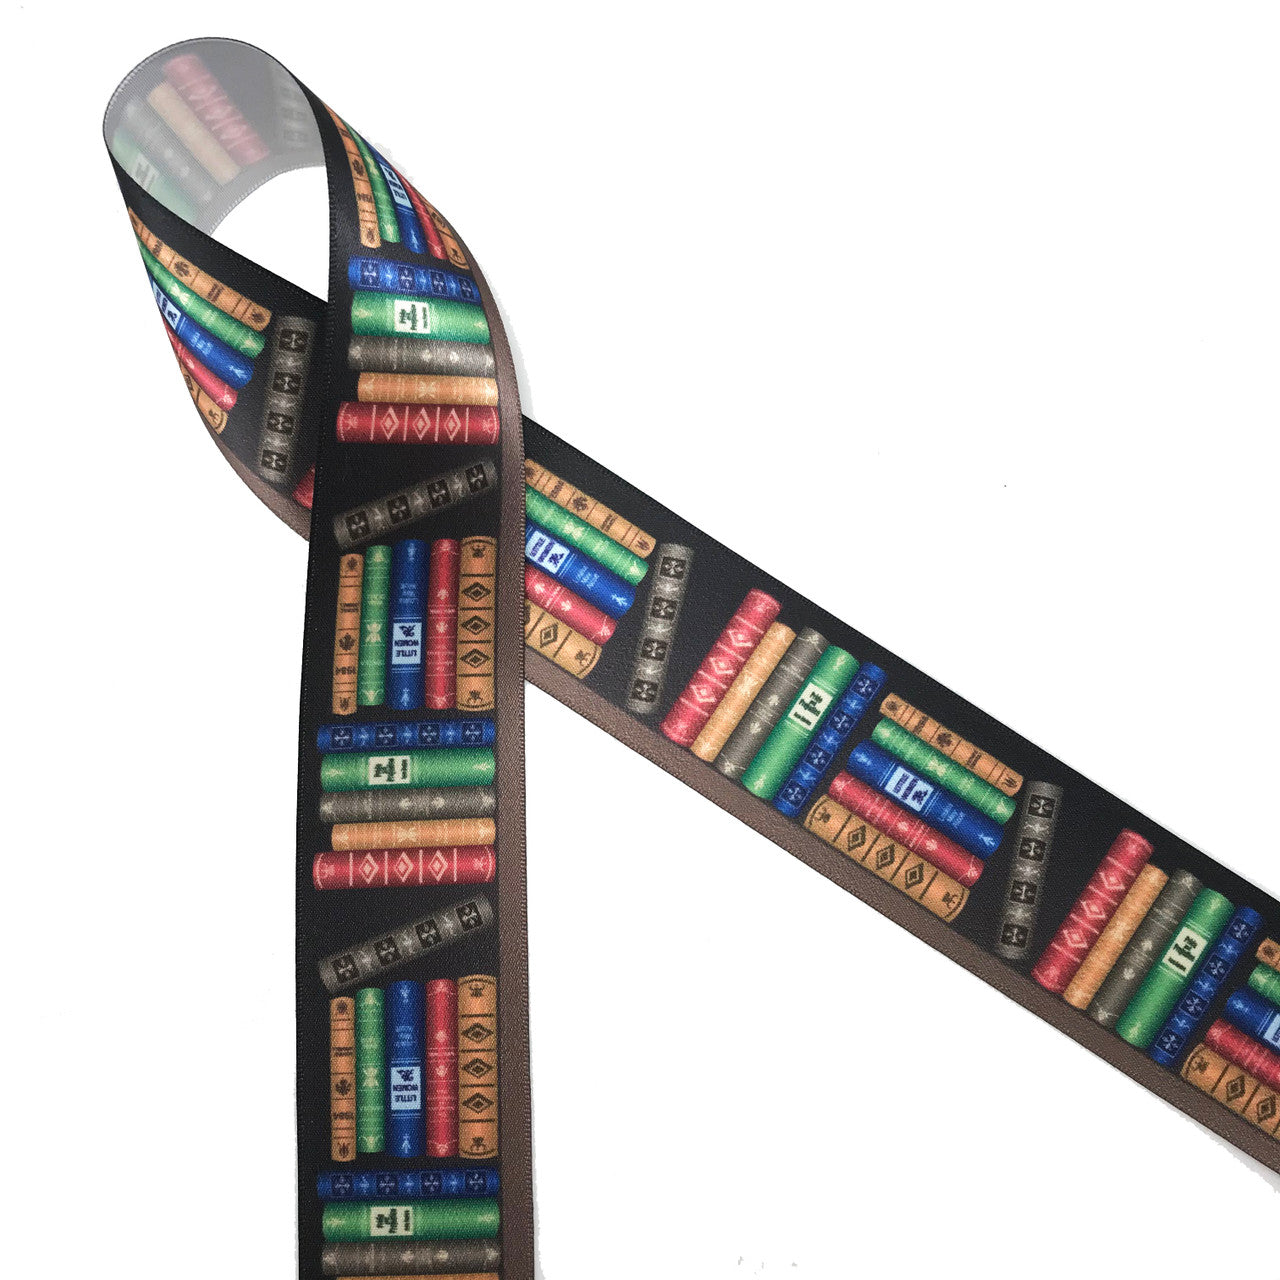 Our book themed ribbon printed on 1.5" white single face satin is the ideal gift wrap ribbon for the librarian, book lover, book worm or book seller in your life. This beautiful luxury ribbon is ideal for quilting, sewing, scrapbooking and craft projects of all kinds. All our ribbons are designed and printed in the USA